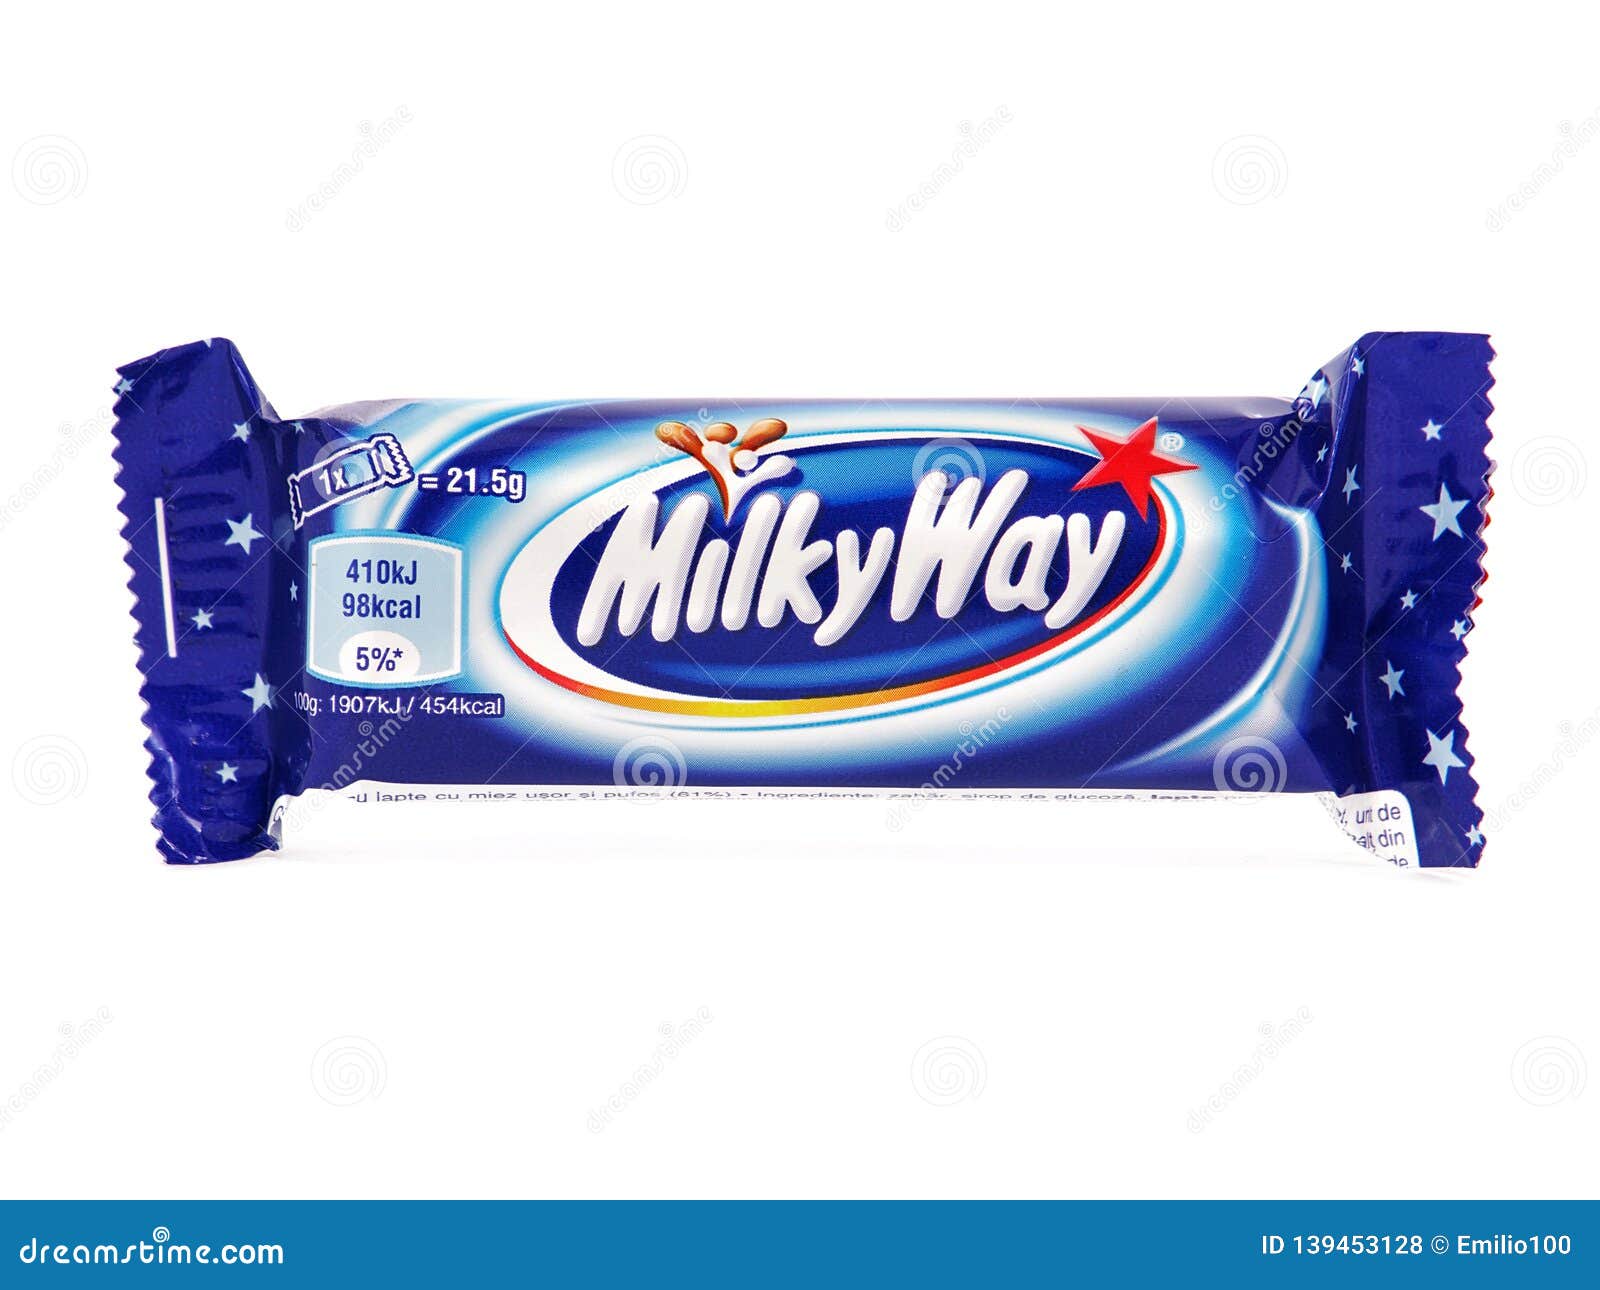 Milky Way White Chocolate | vlr.eng.br